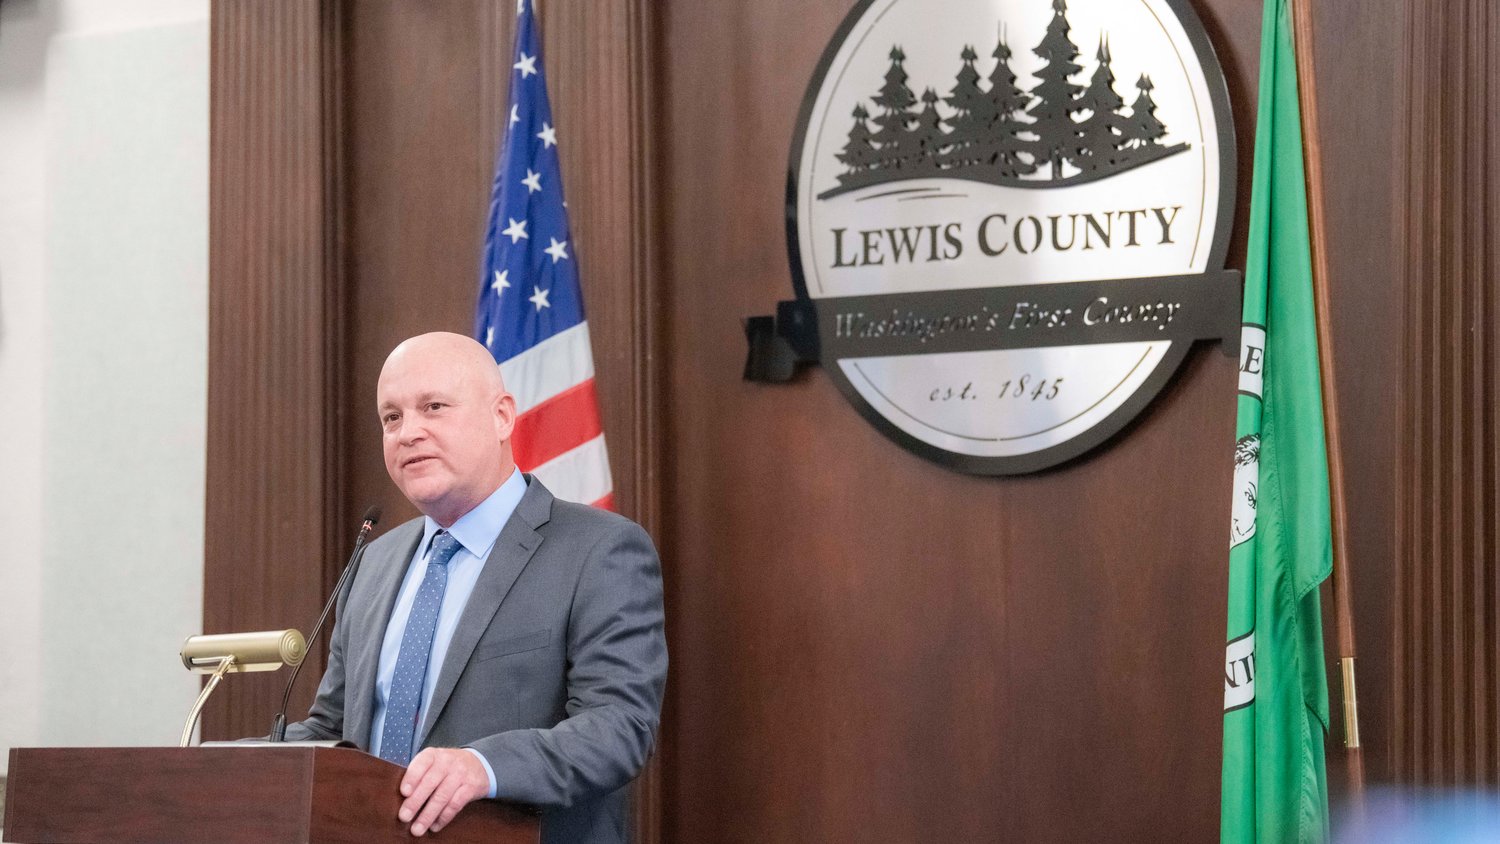 Scott Brummer makes a speech after being sworn in as the Lewis County District 3 commissioner Wednesday morning in Chehalis.